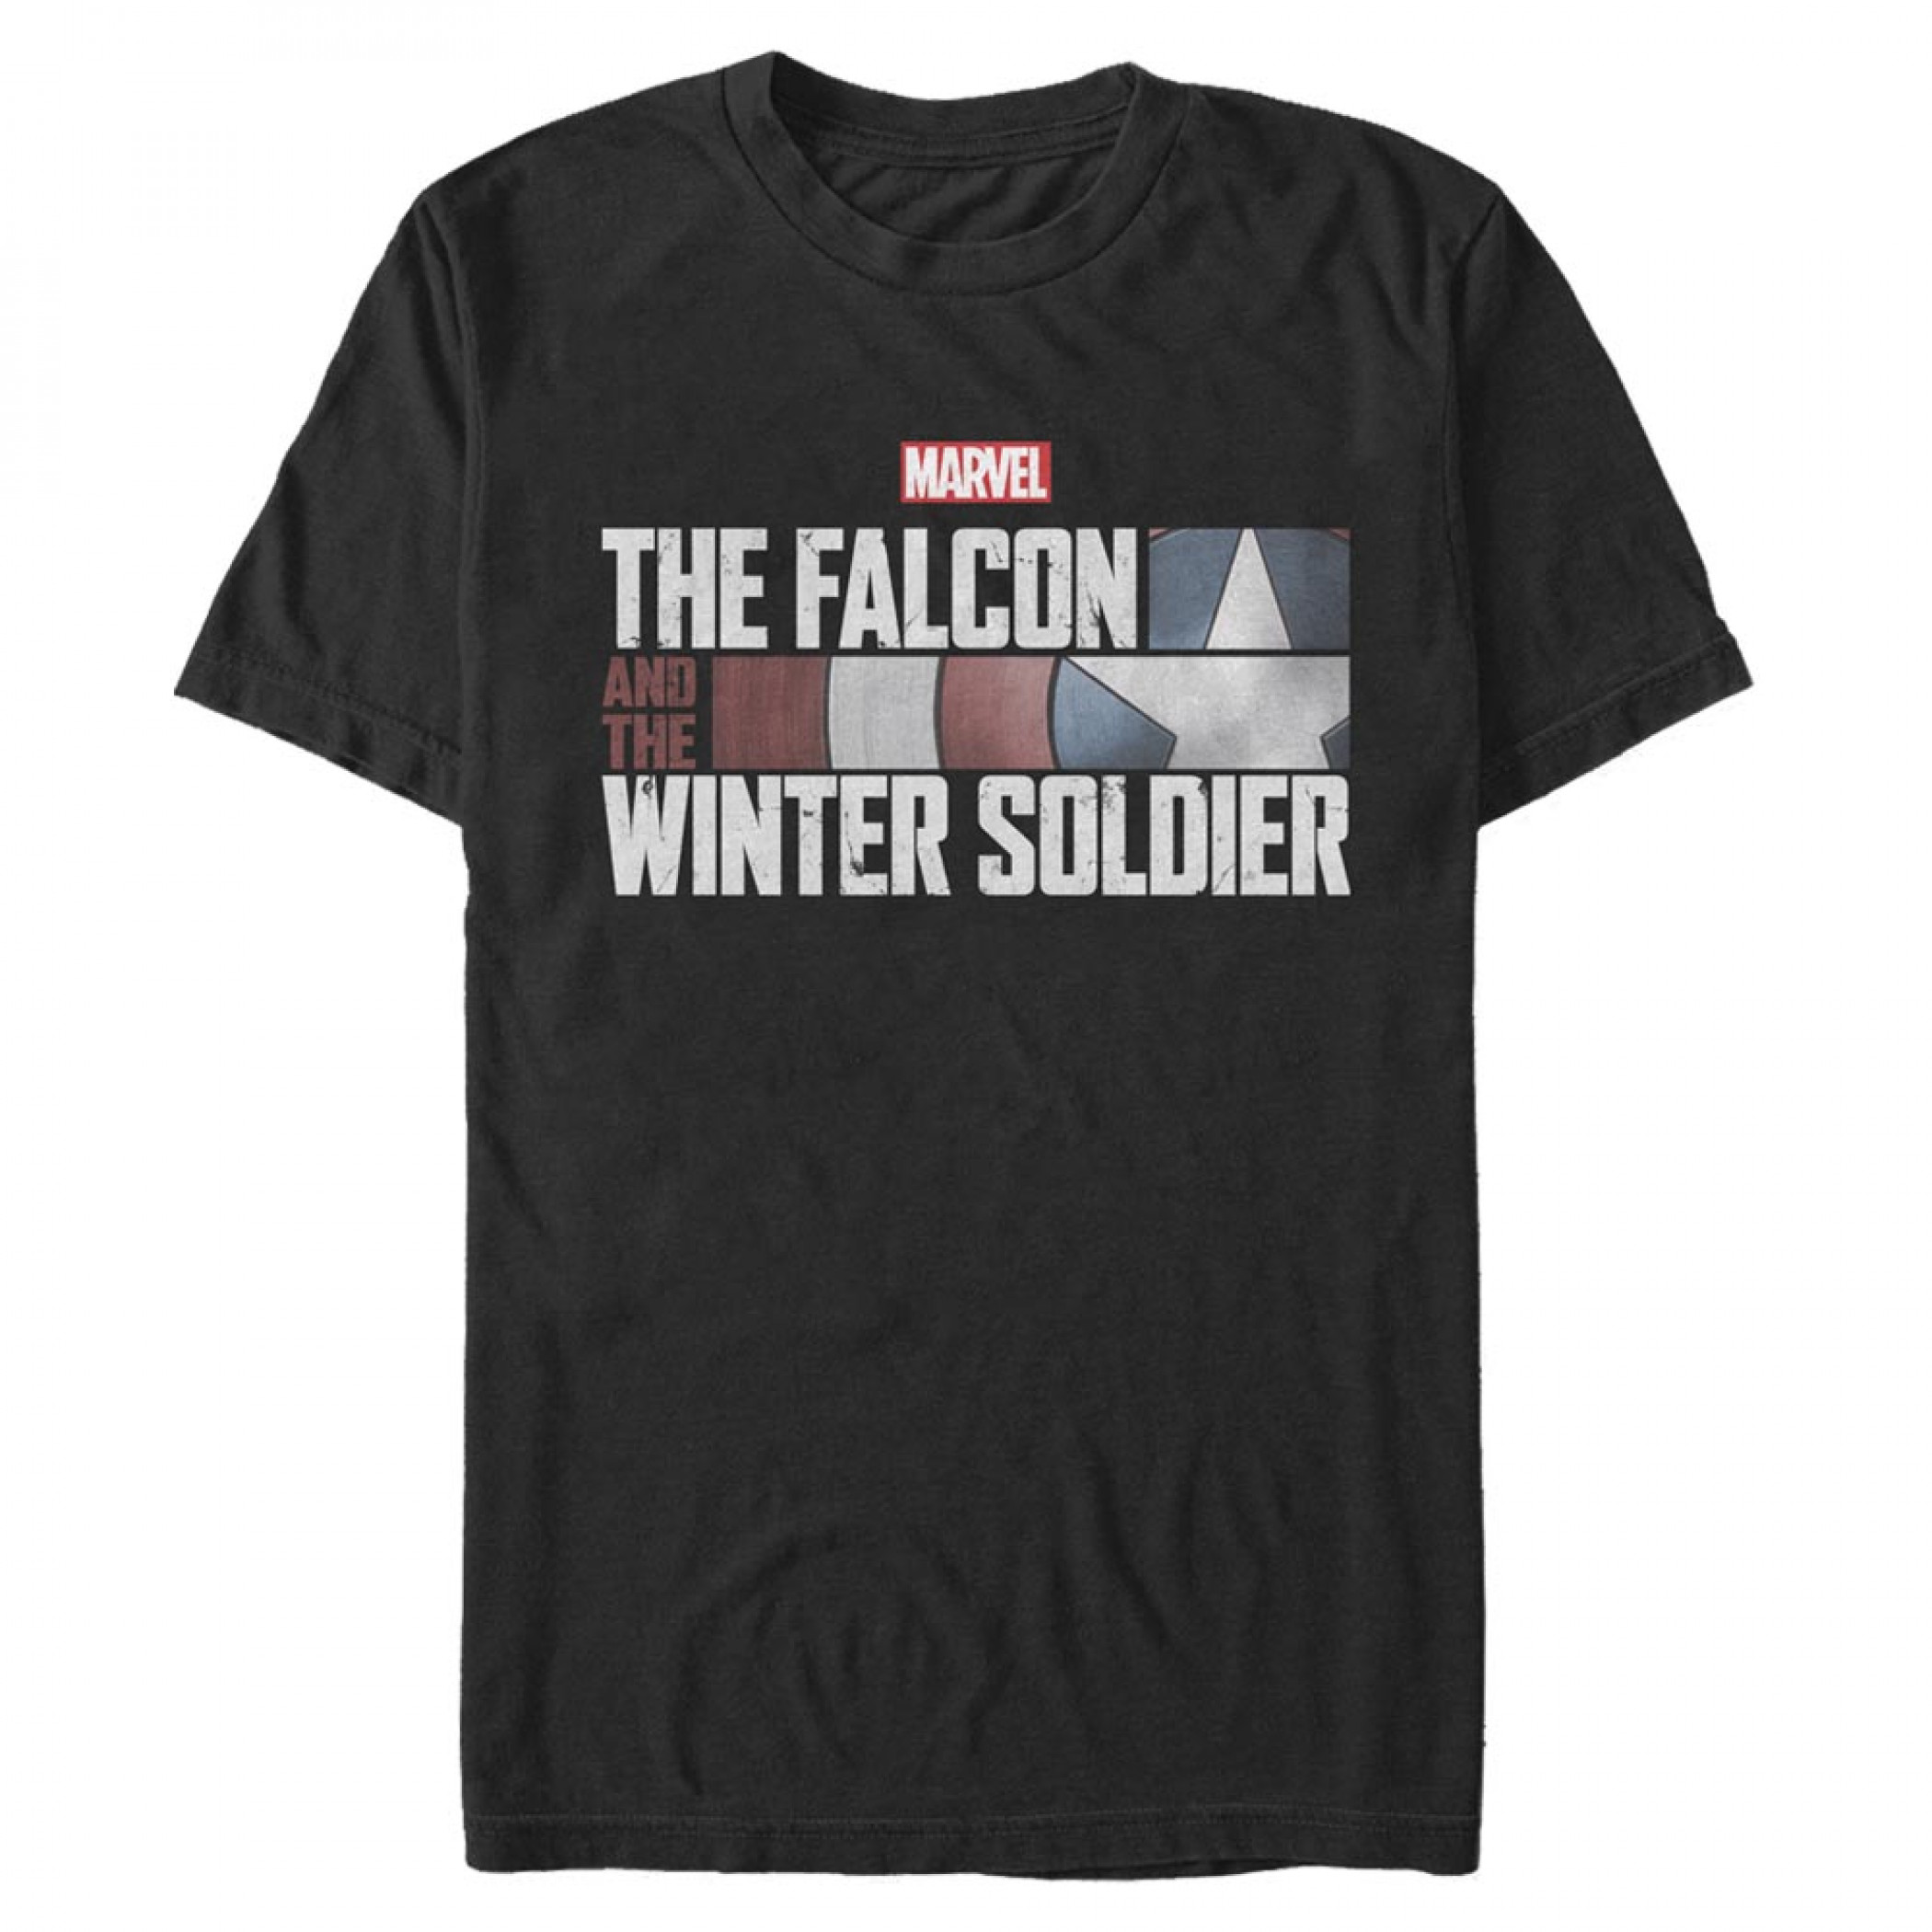 The Falcon and the Winter Soldier Logo T-Shirt